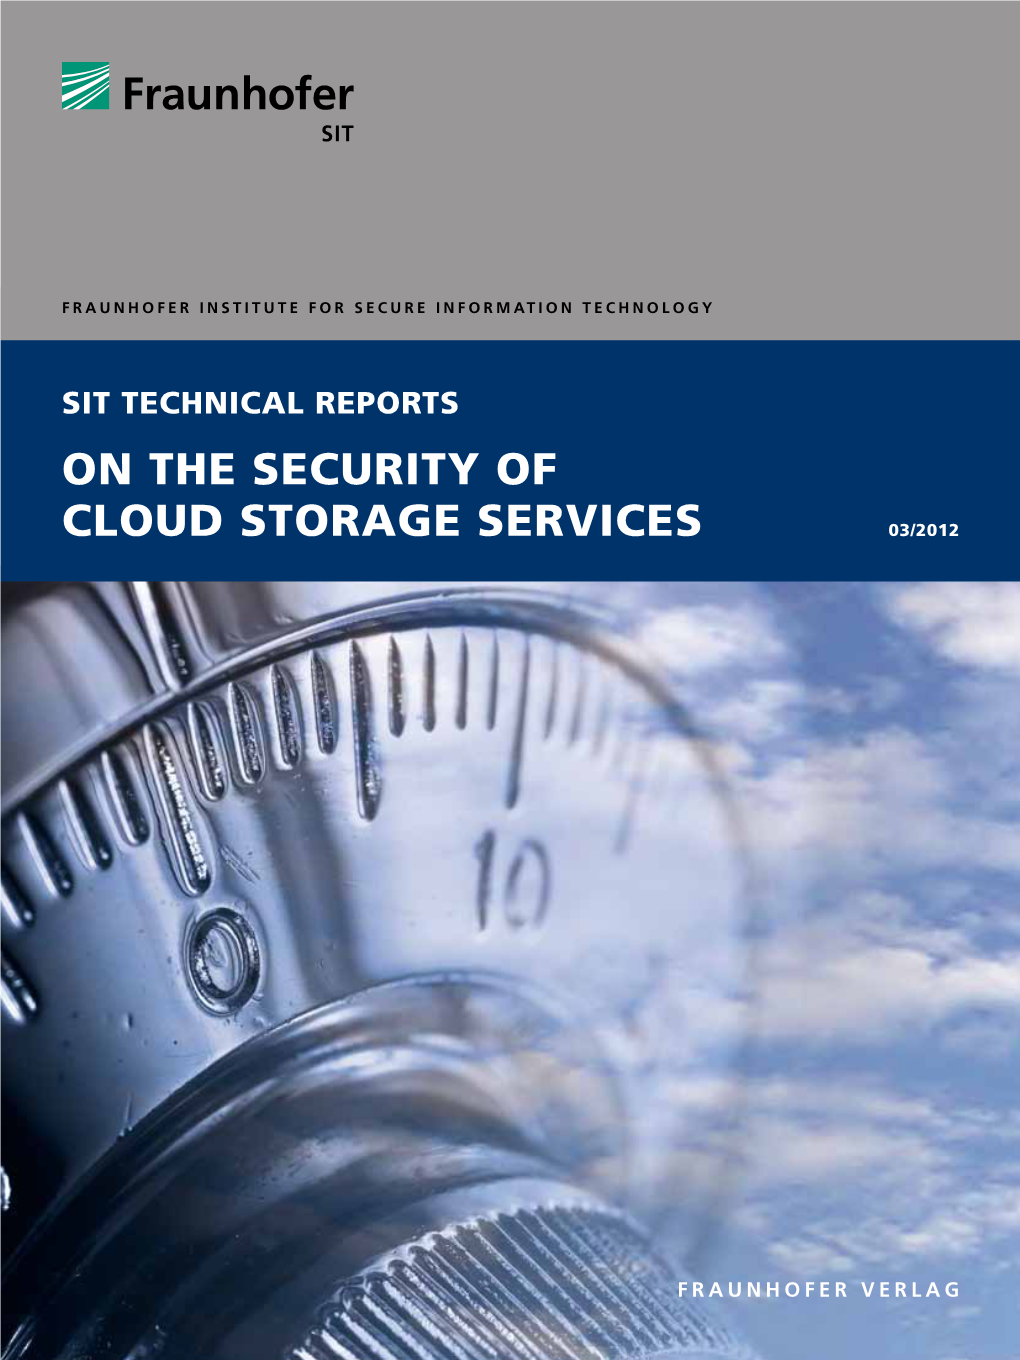 On the Security of Cloud Storage Services